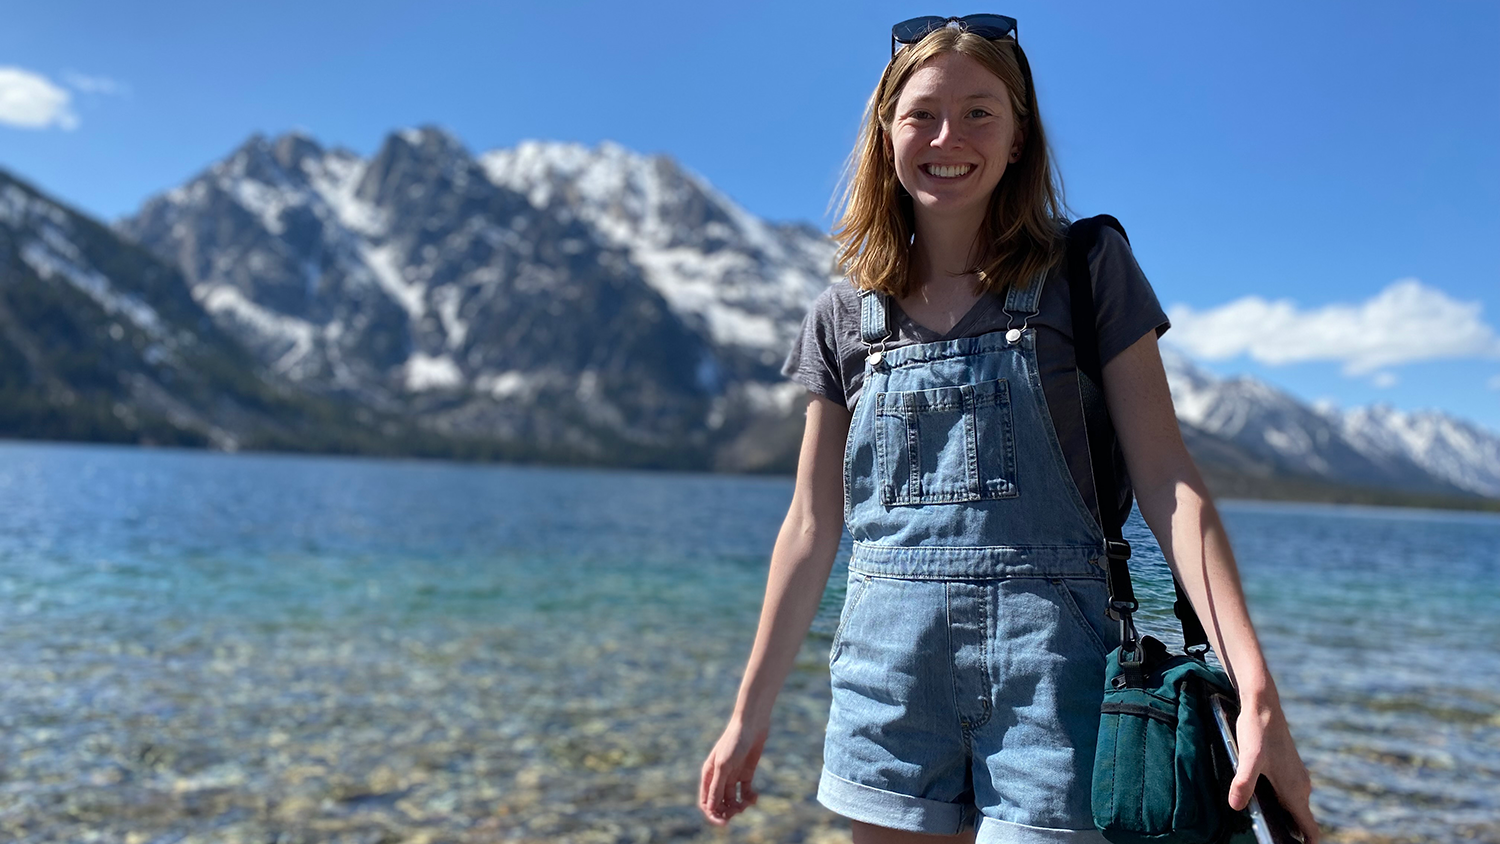 Julianne Reas stands on a lakeshore in front of a mountain - 5 Questions with Global Change Fellow Juulianne Read - College of Natural Resources News NC State University